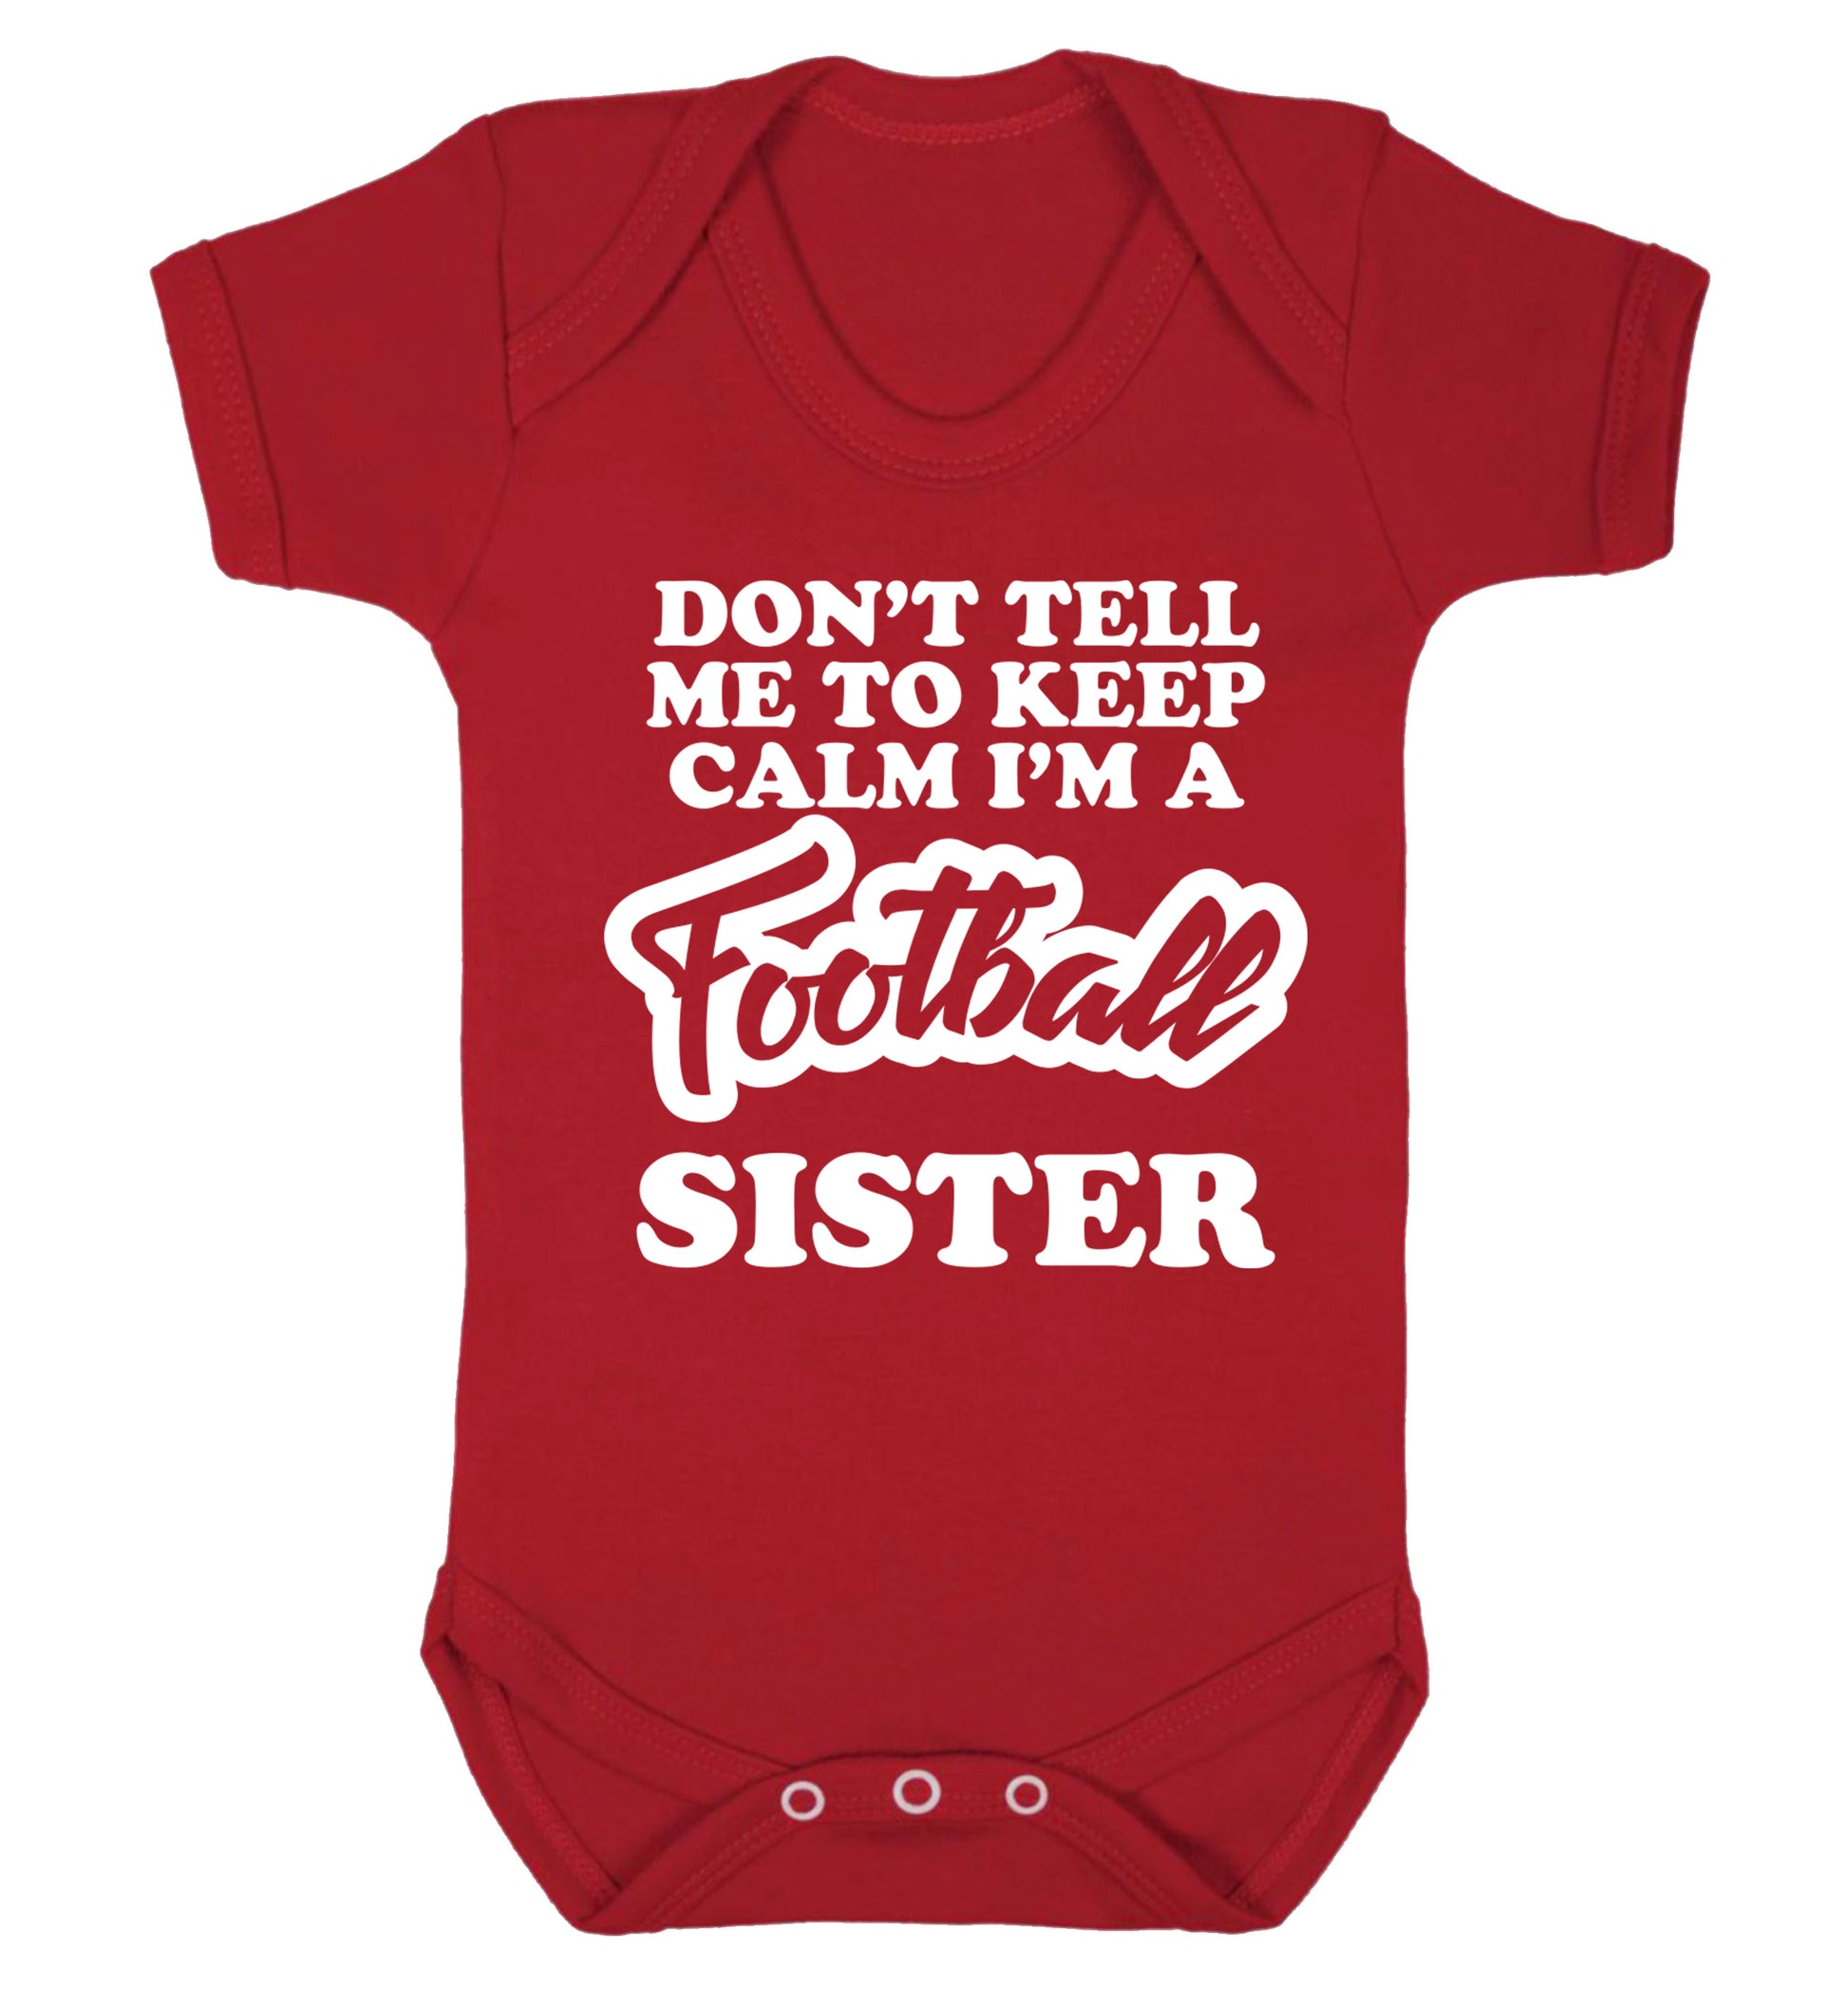 Don't tell me to keep calm I'm a football sister Baby Vest red 18-24 months